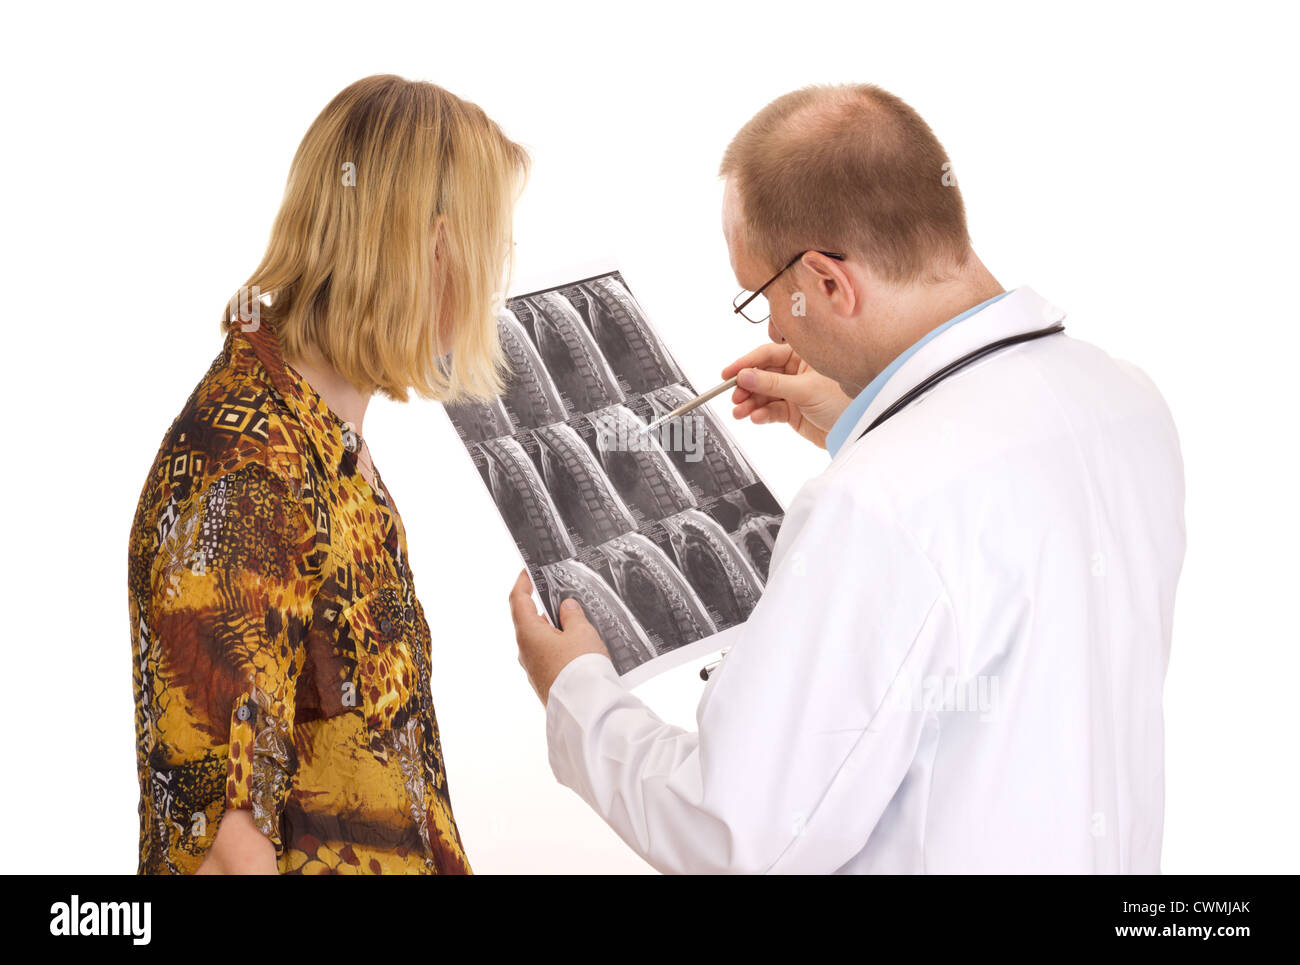 Medical doctor examining a patient Stock Photo